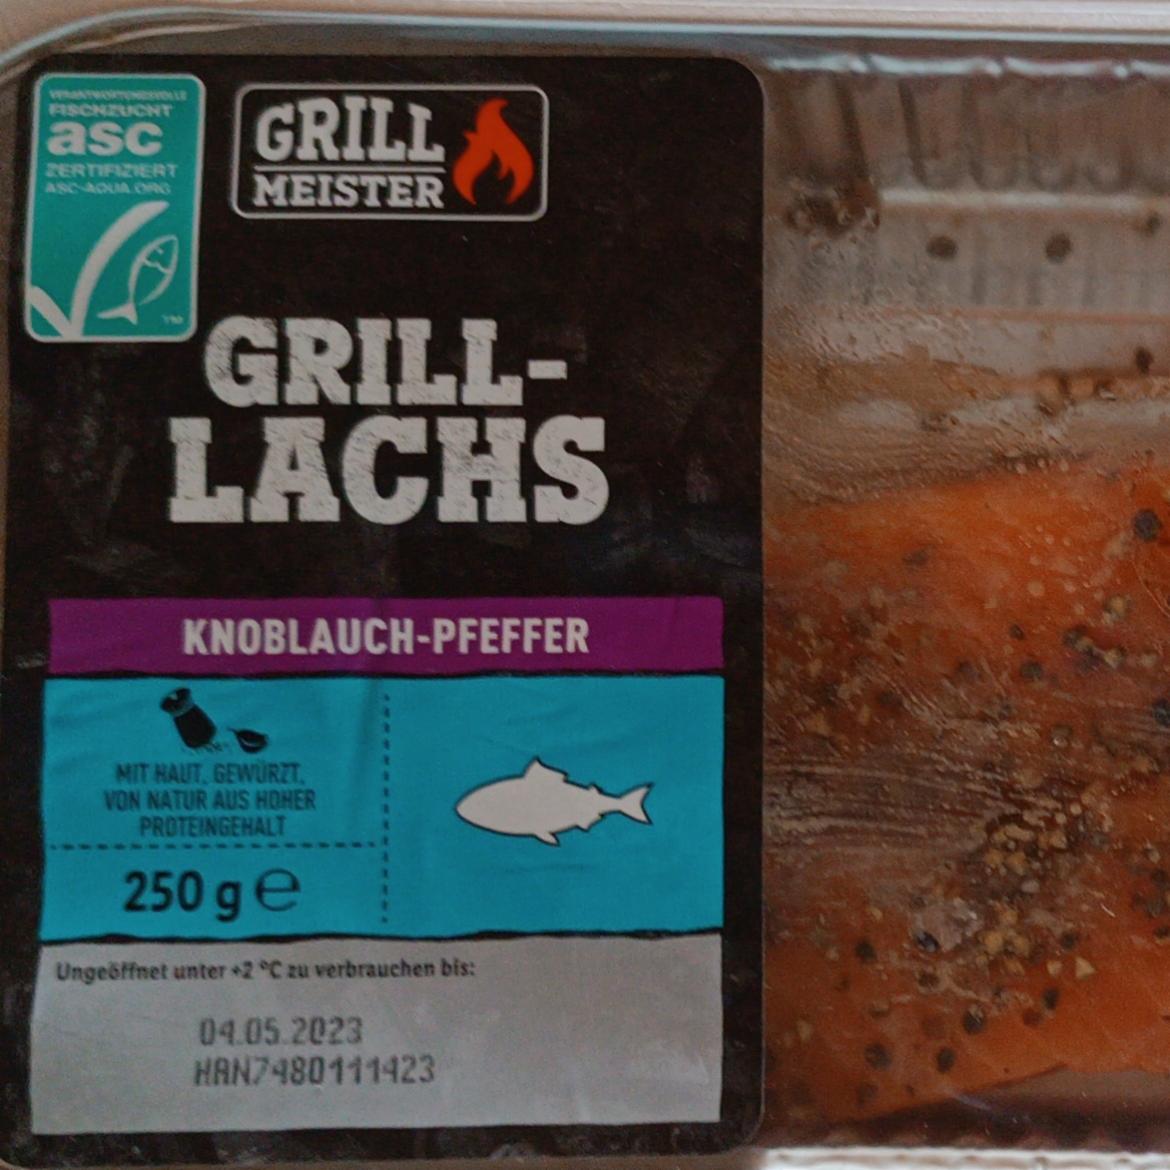 Fotografie - Grill-Lachs Knoblauch-Pfeffer Grill Meister